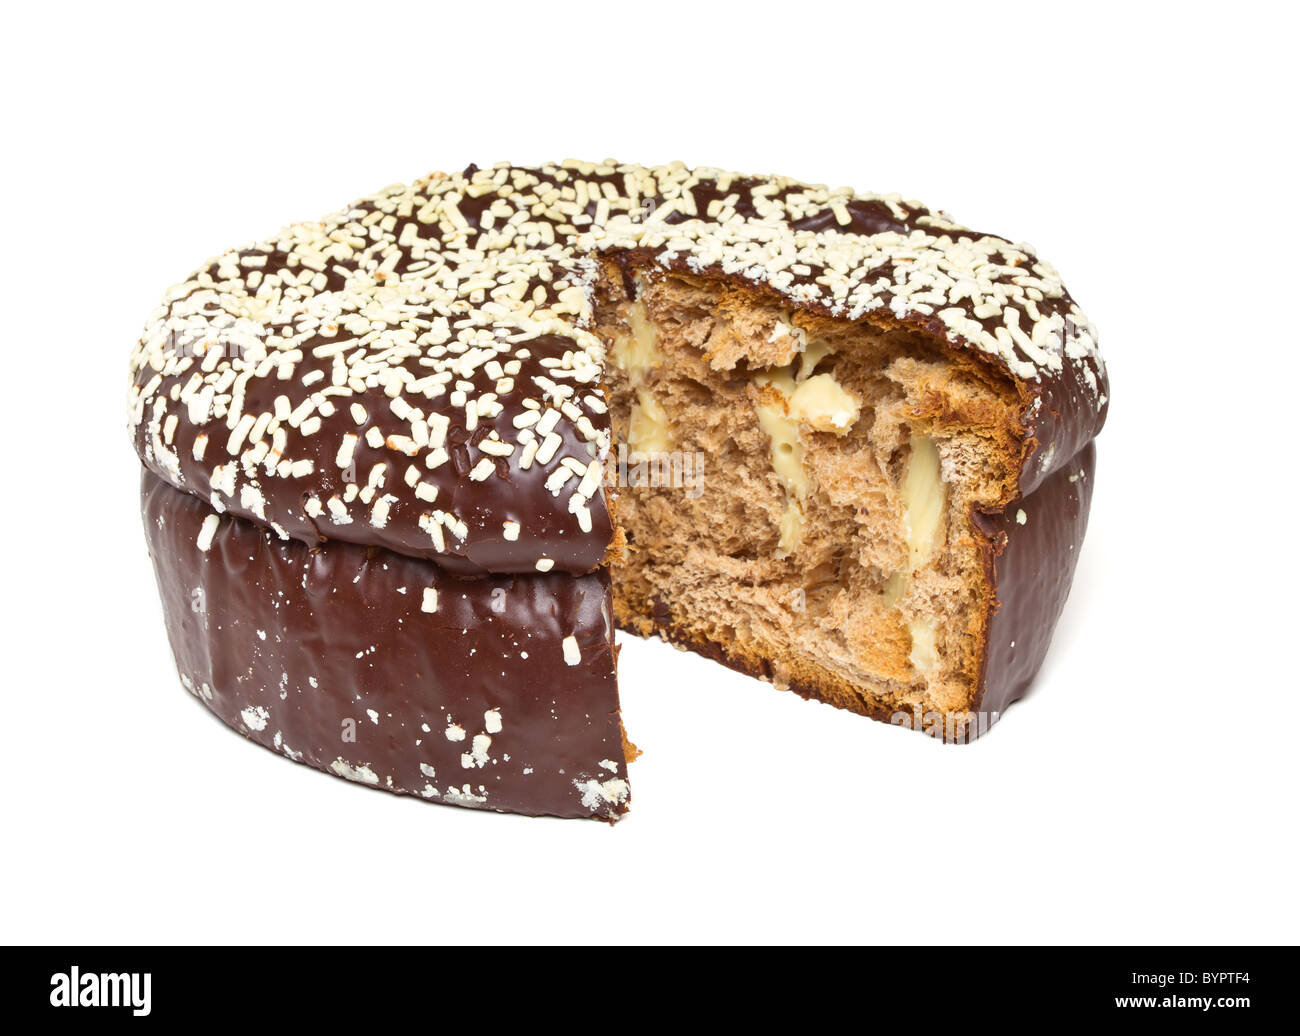 Chocolate Panettone a traditional Italian Christmas Cake filled with custard. Stock Photo